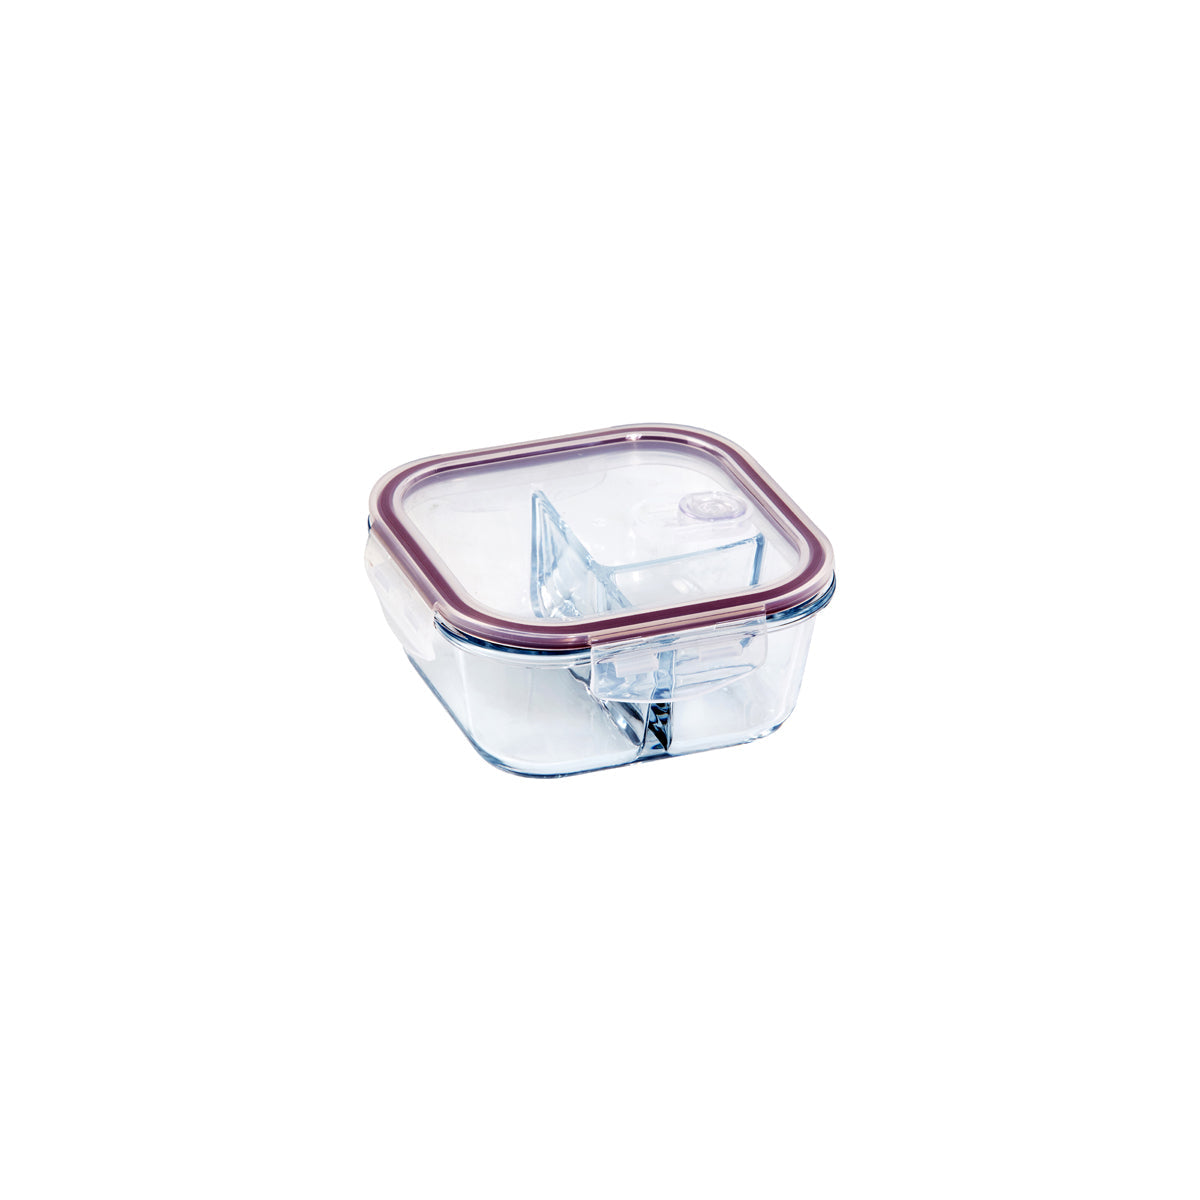 ETR48144 Eterna Glass Containers 3 Divider Square 800ml Tomkin Australia Hospitality Supplies